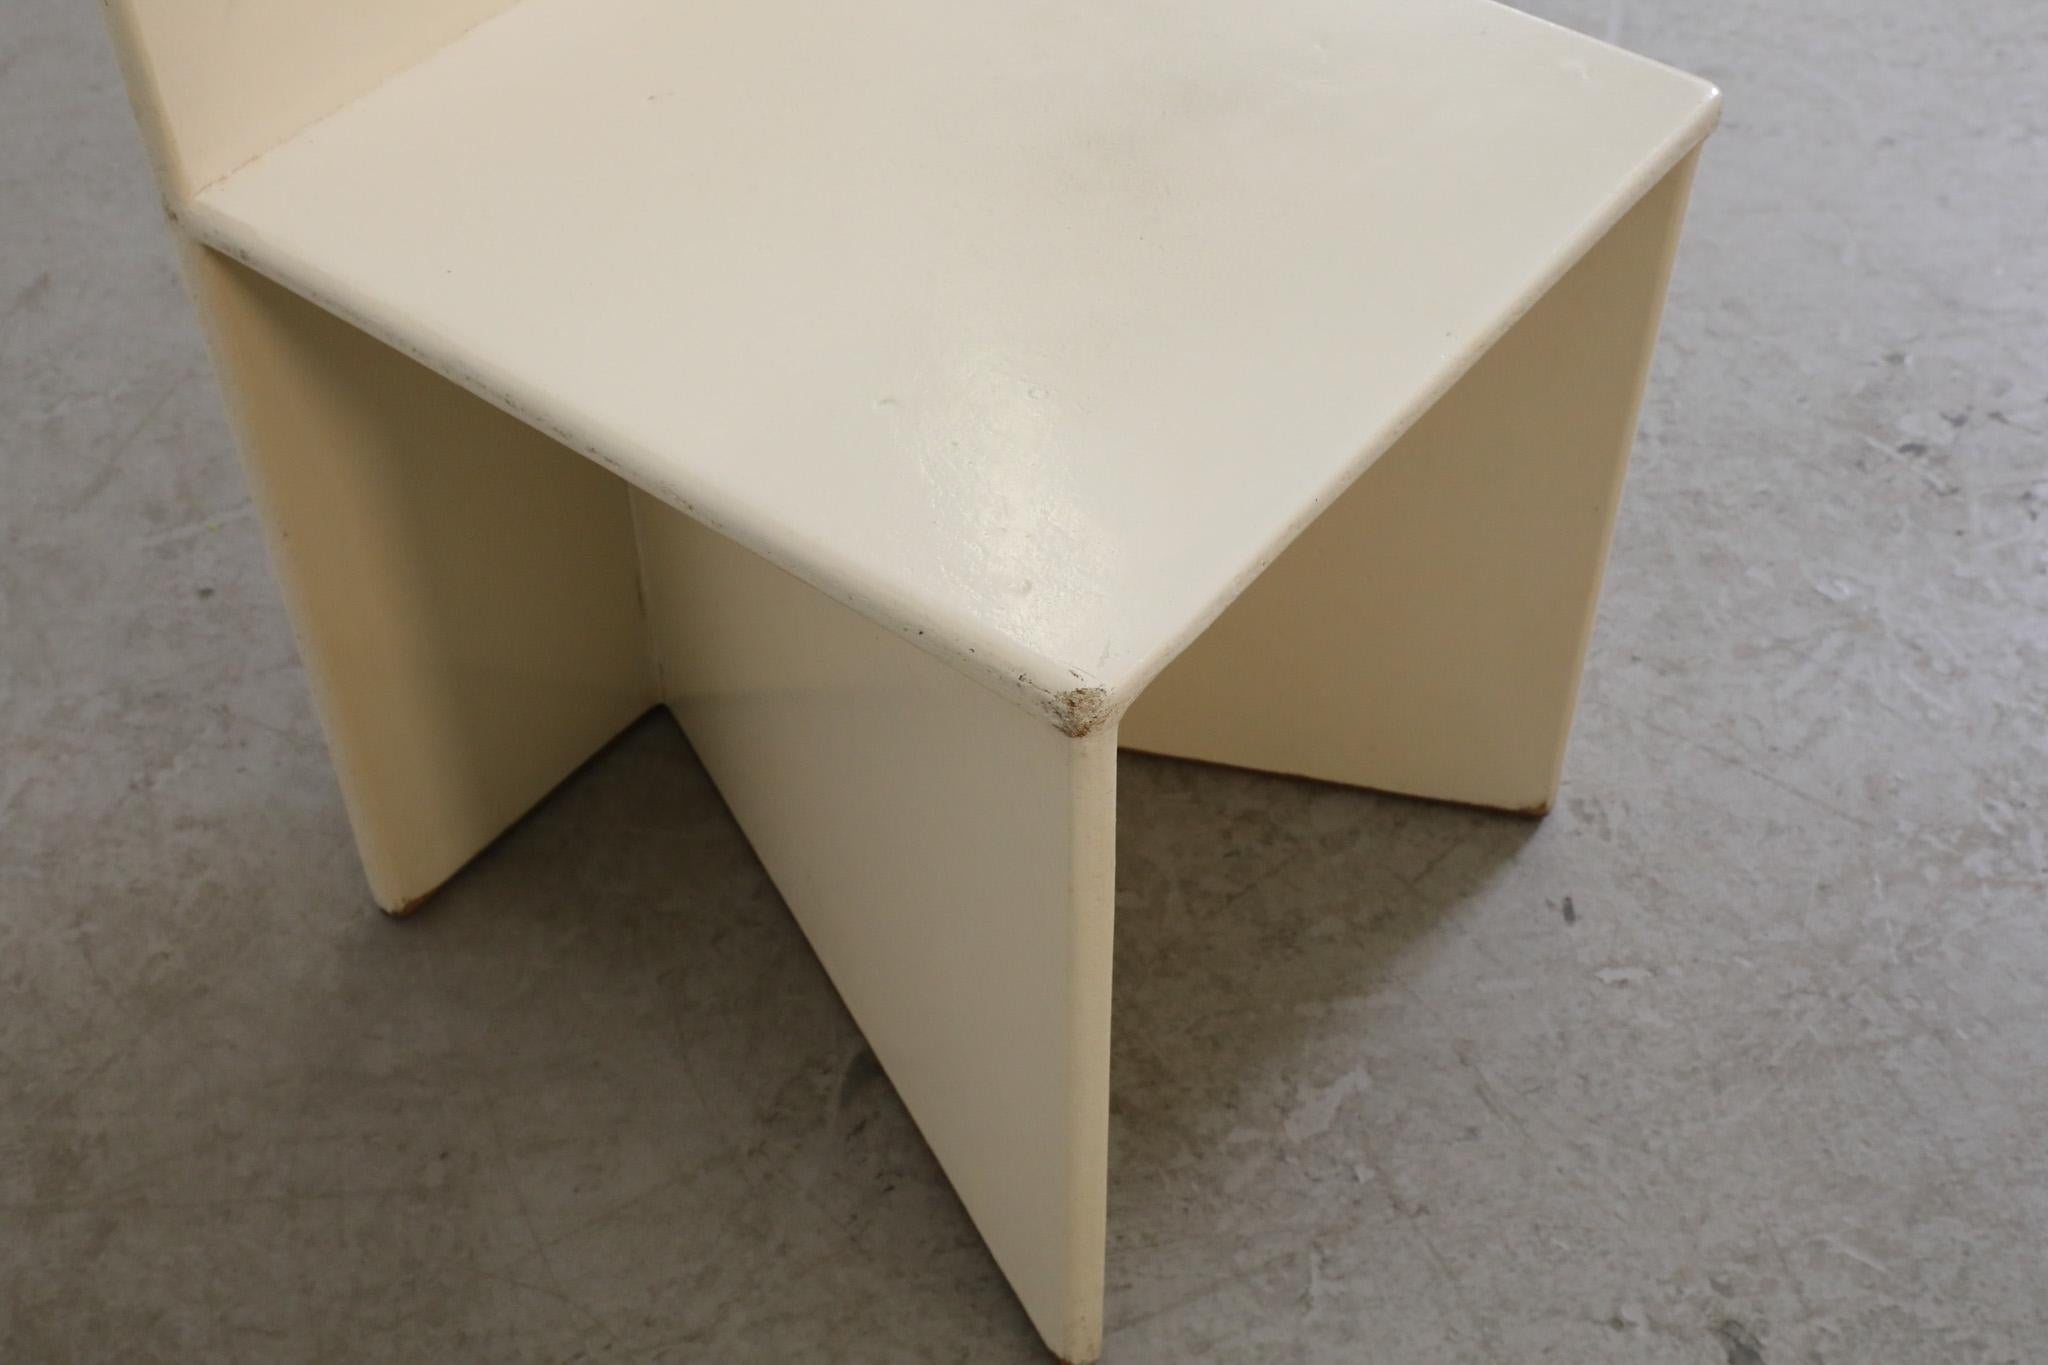 Pre War Gerrit Rietveld Style Modernist Painted Chair For Sale 8